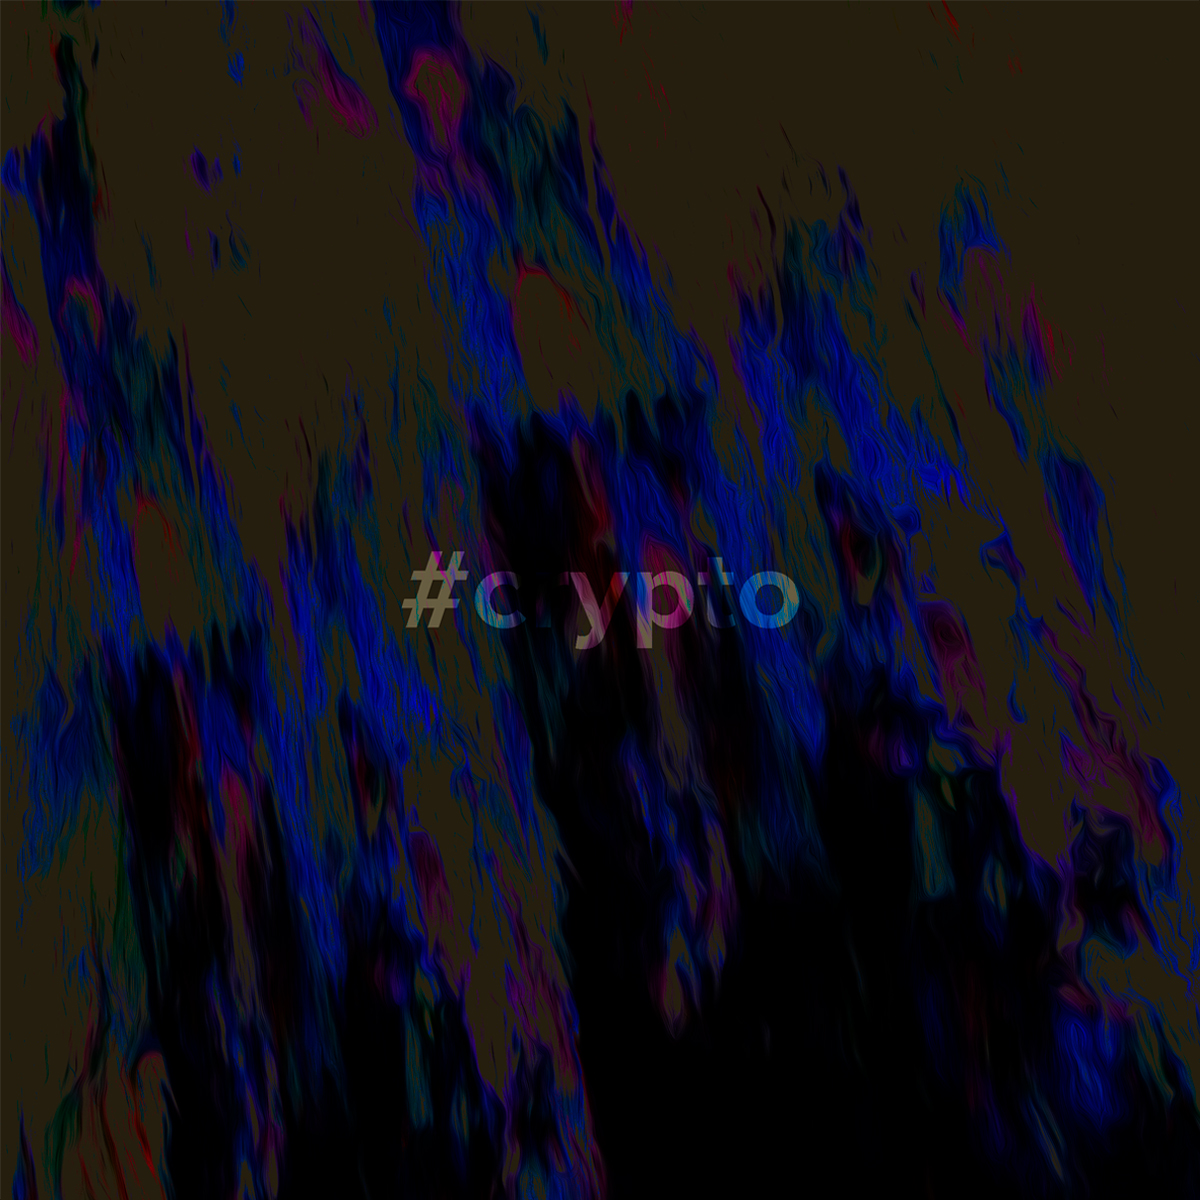 A black square with red and blue digital paint splatters over it. Beneath the splatters is the word "#crypto" in white.